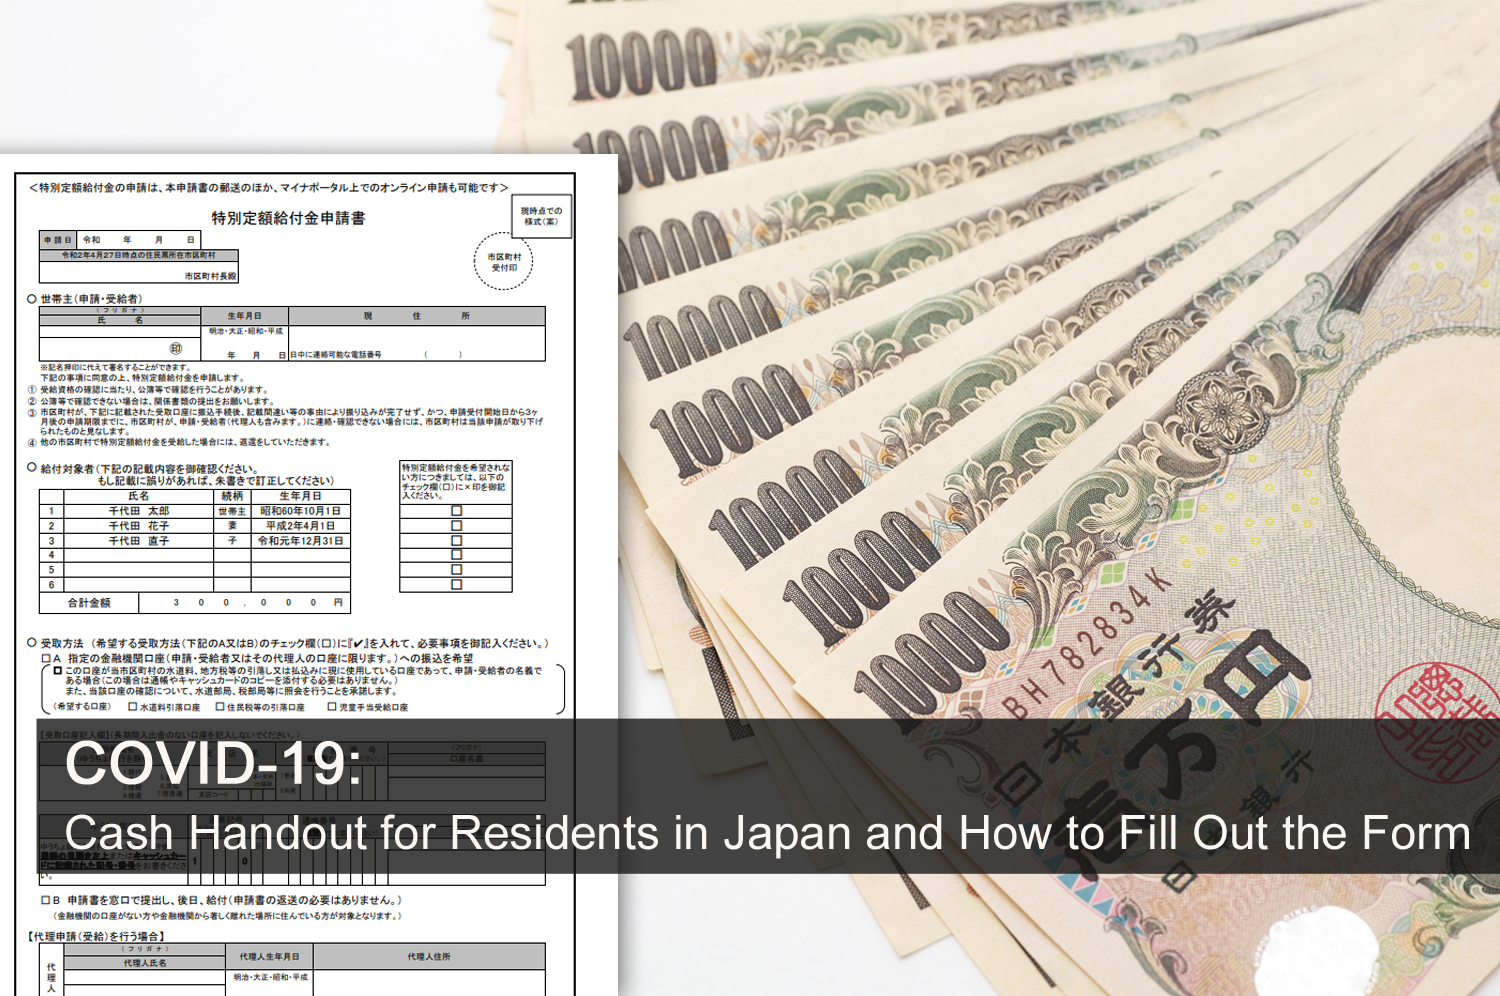 COVID-20: Cash Handout for Residents in Japan and How to Fill Out